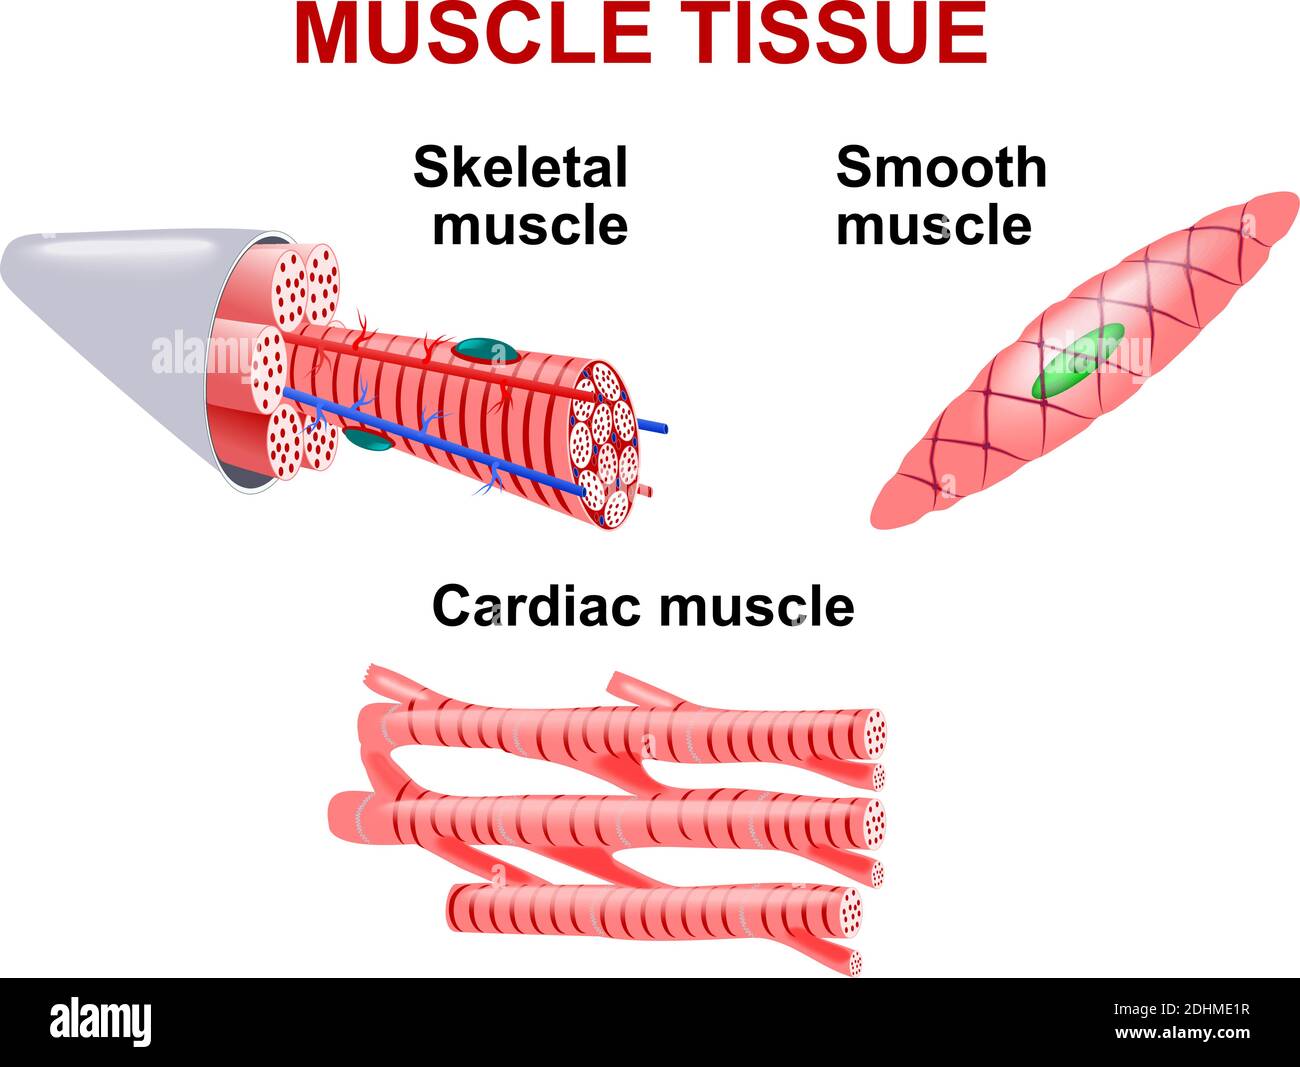 Types Of Muscle Tissue Skeletal Muscle Smooth Muscle Cardiac Muscle